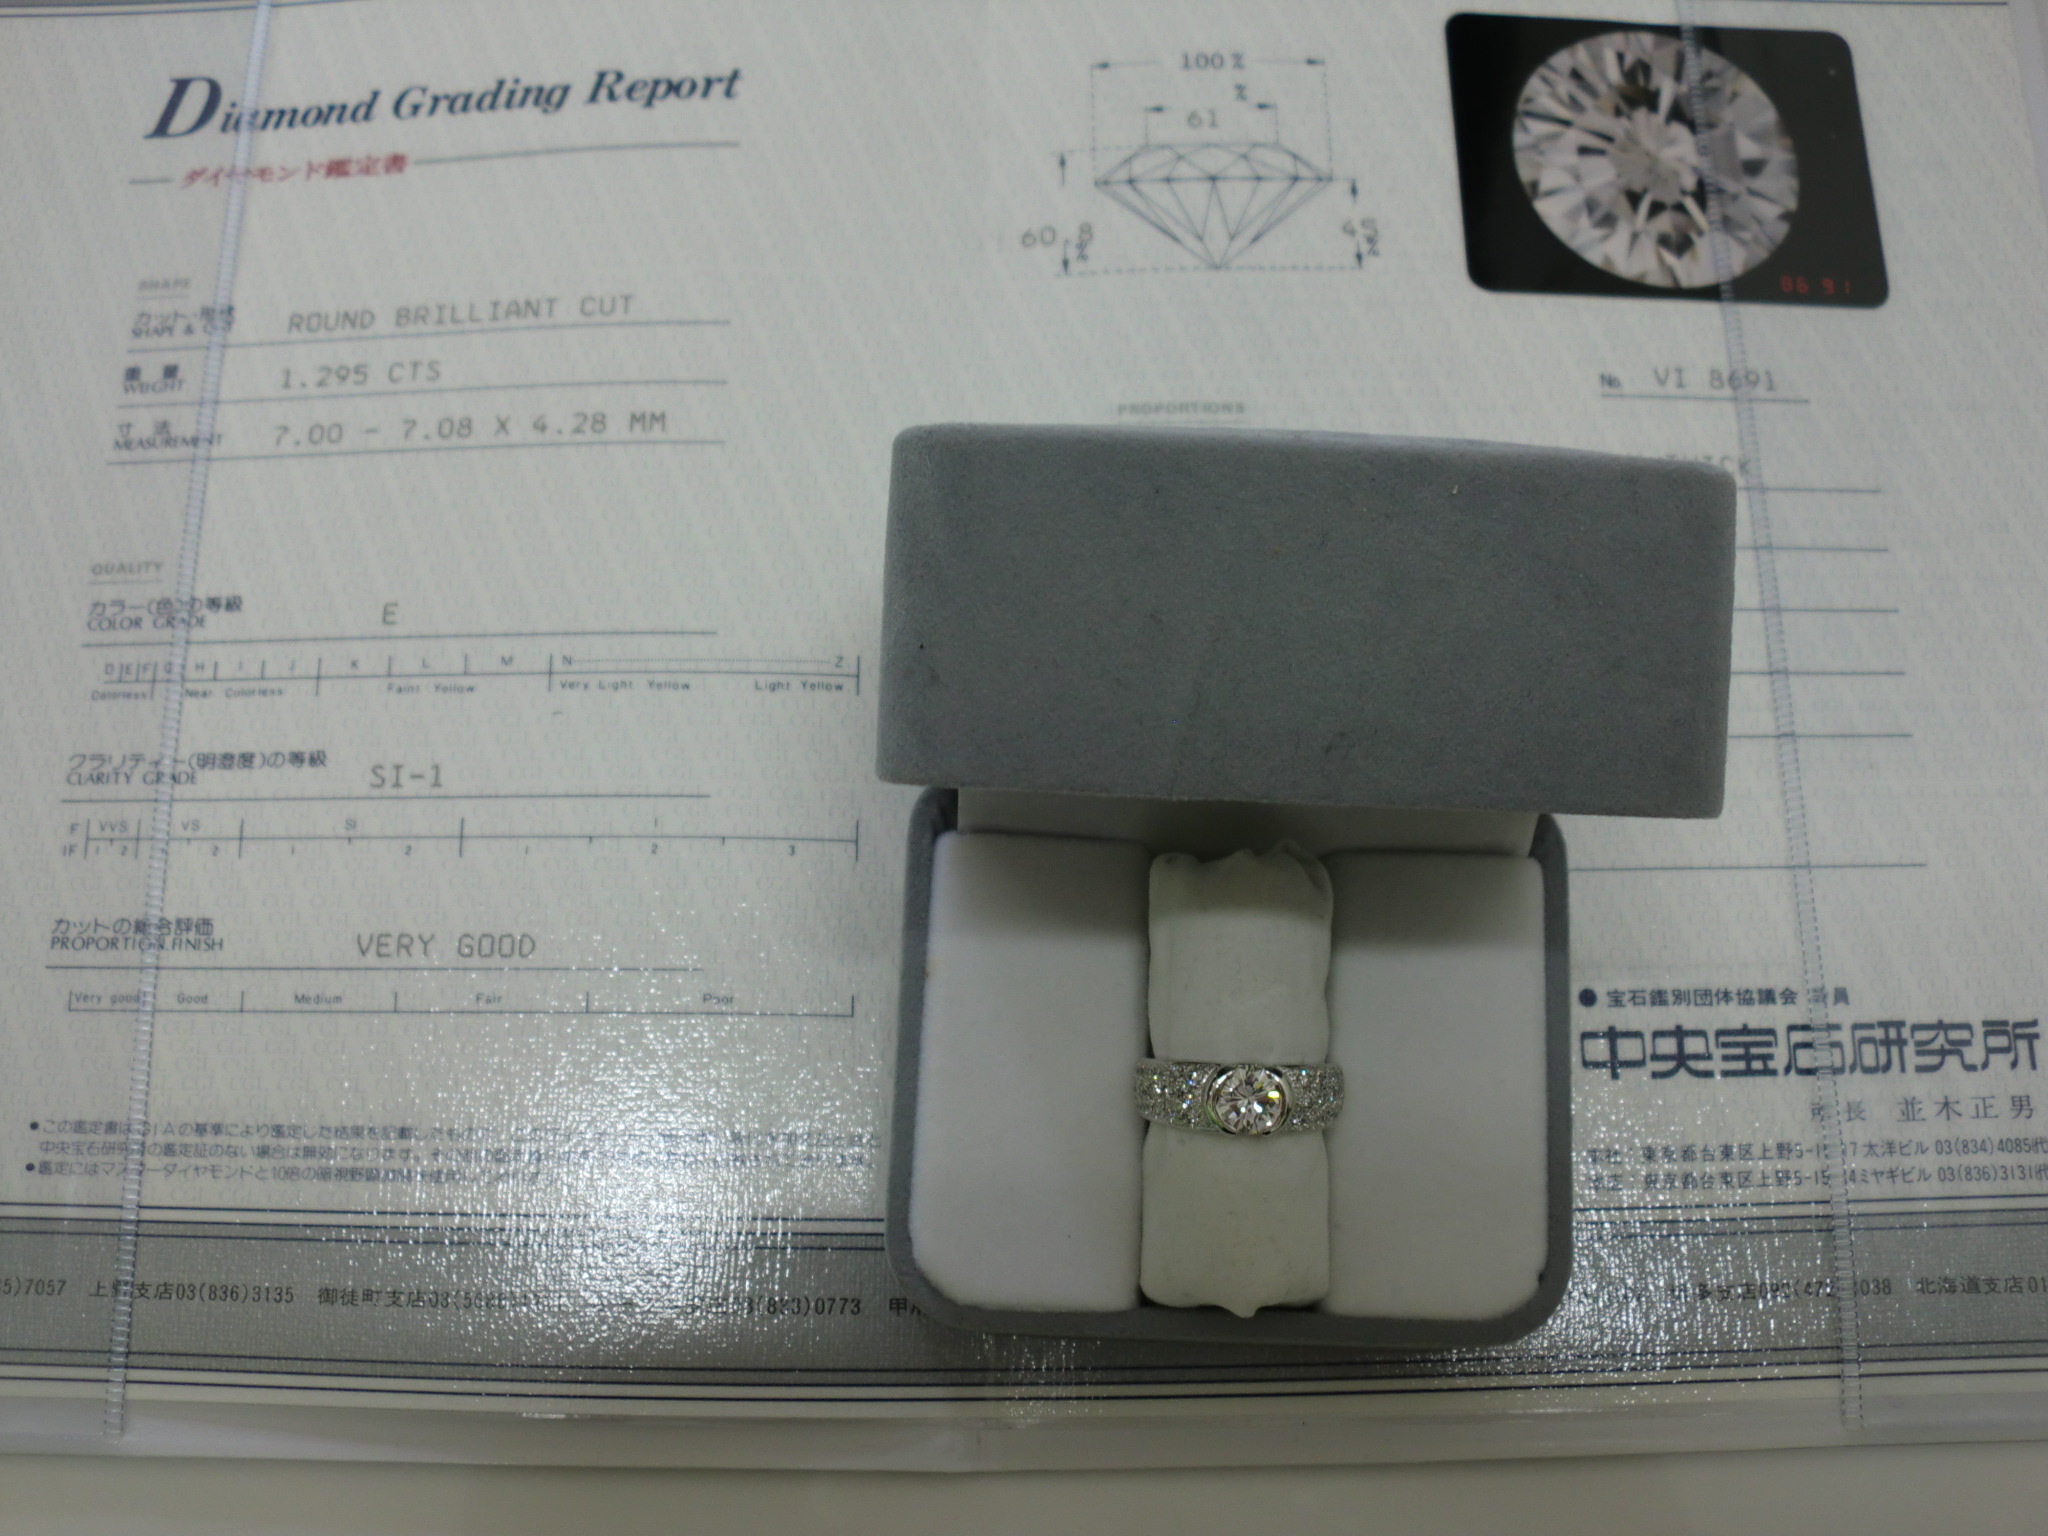 Pt1000 リング　D 1.295Ct　E　SI-1　VERY GOOD　　MD 0.65Ct